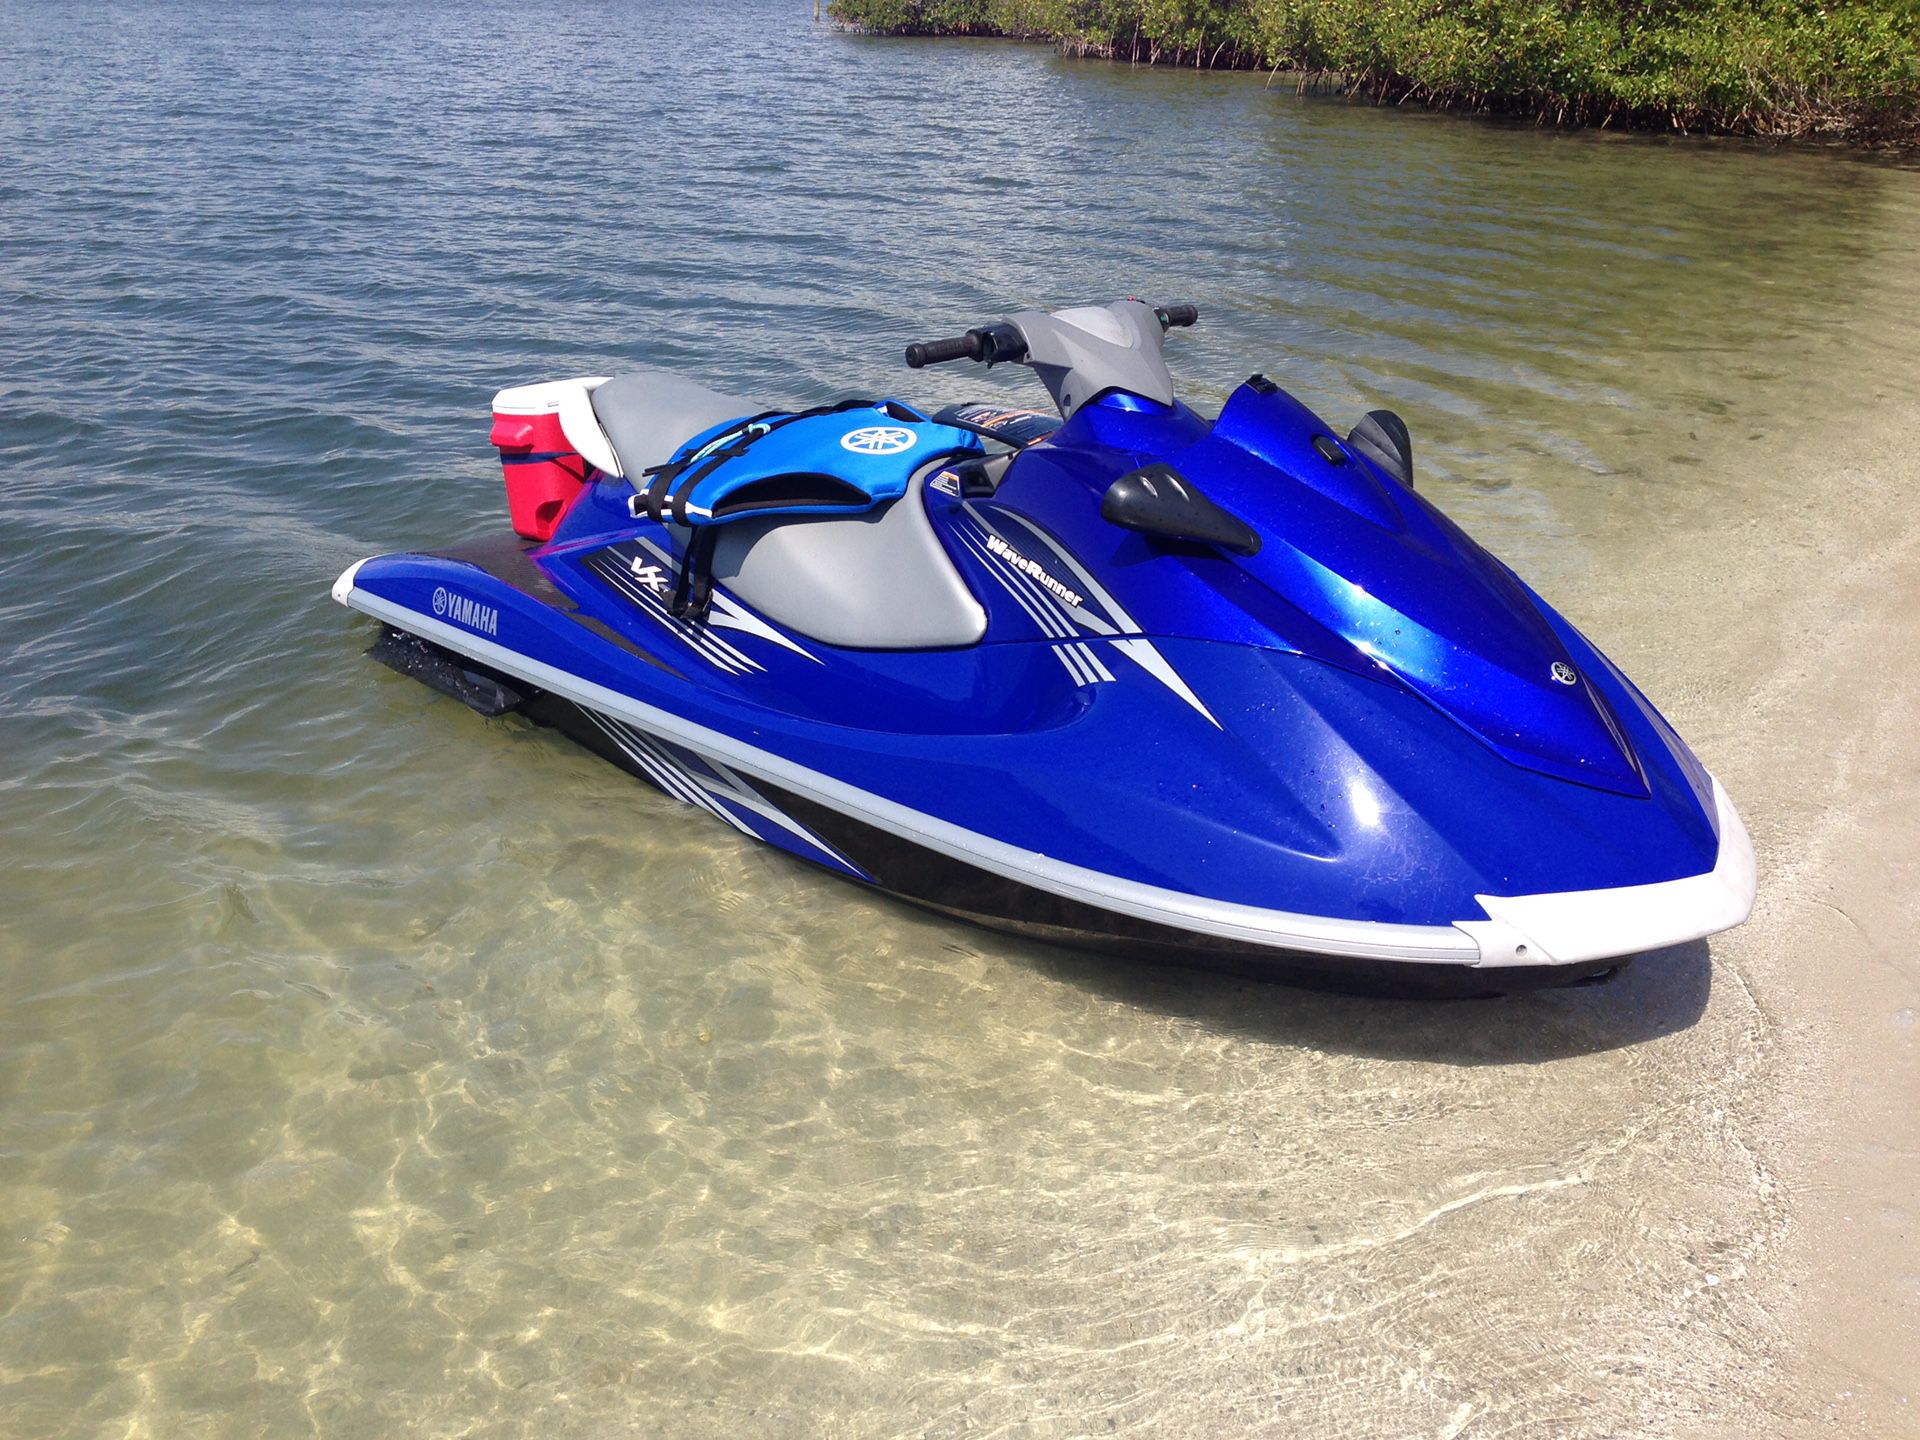 2010 VX Deluxe Yamaha wave runner and trailer